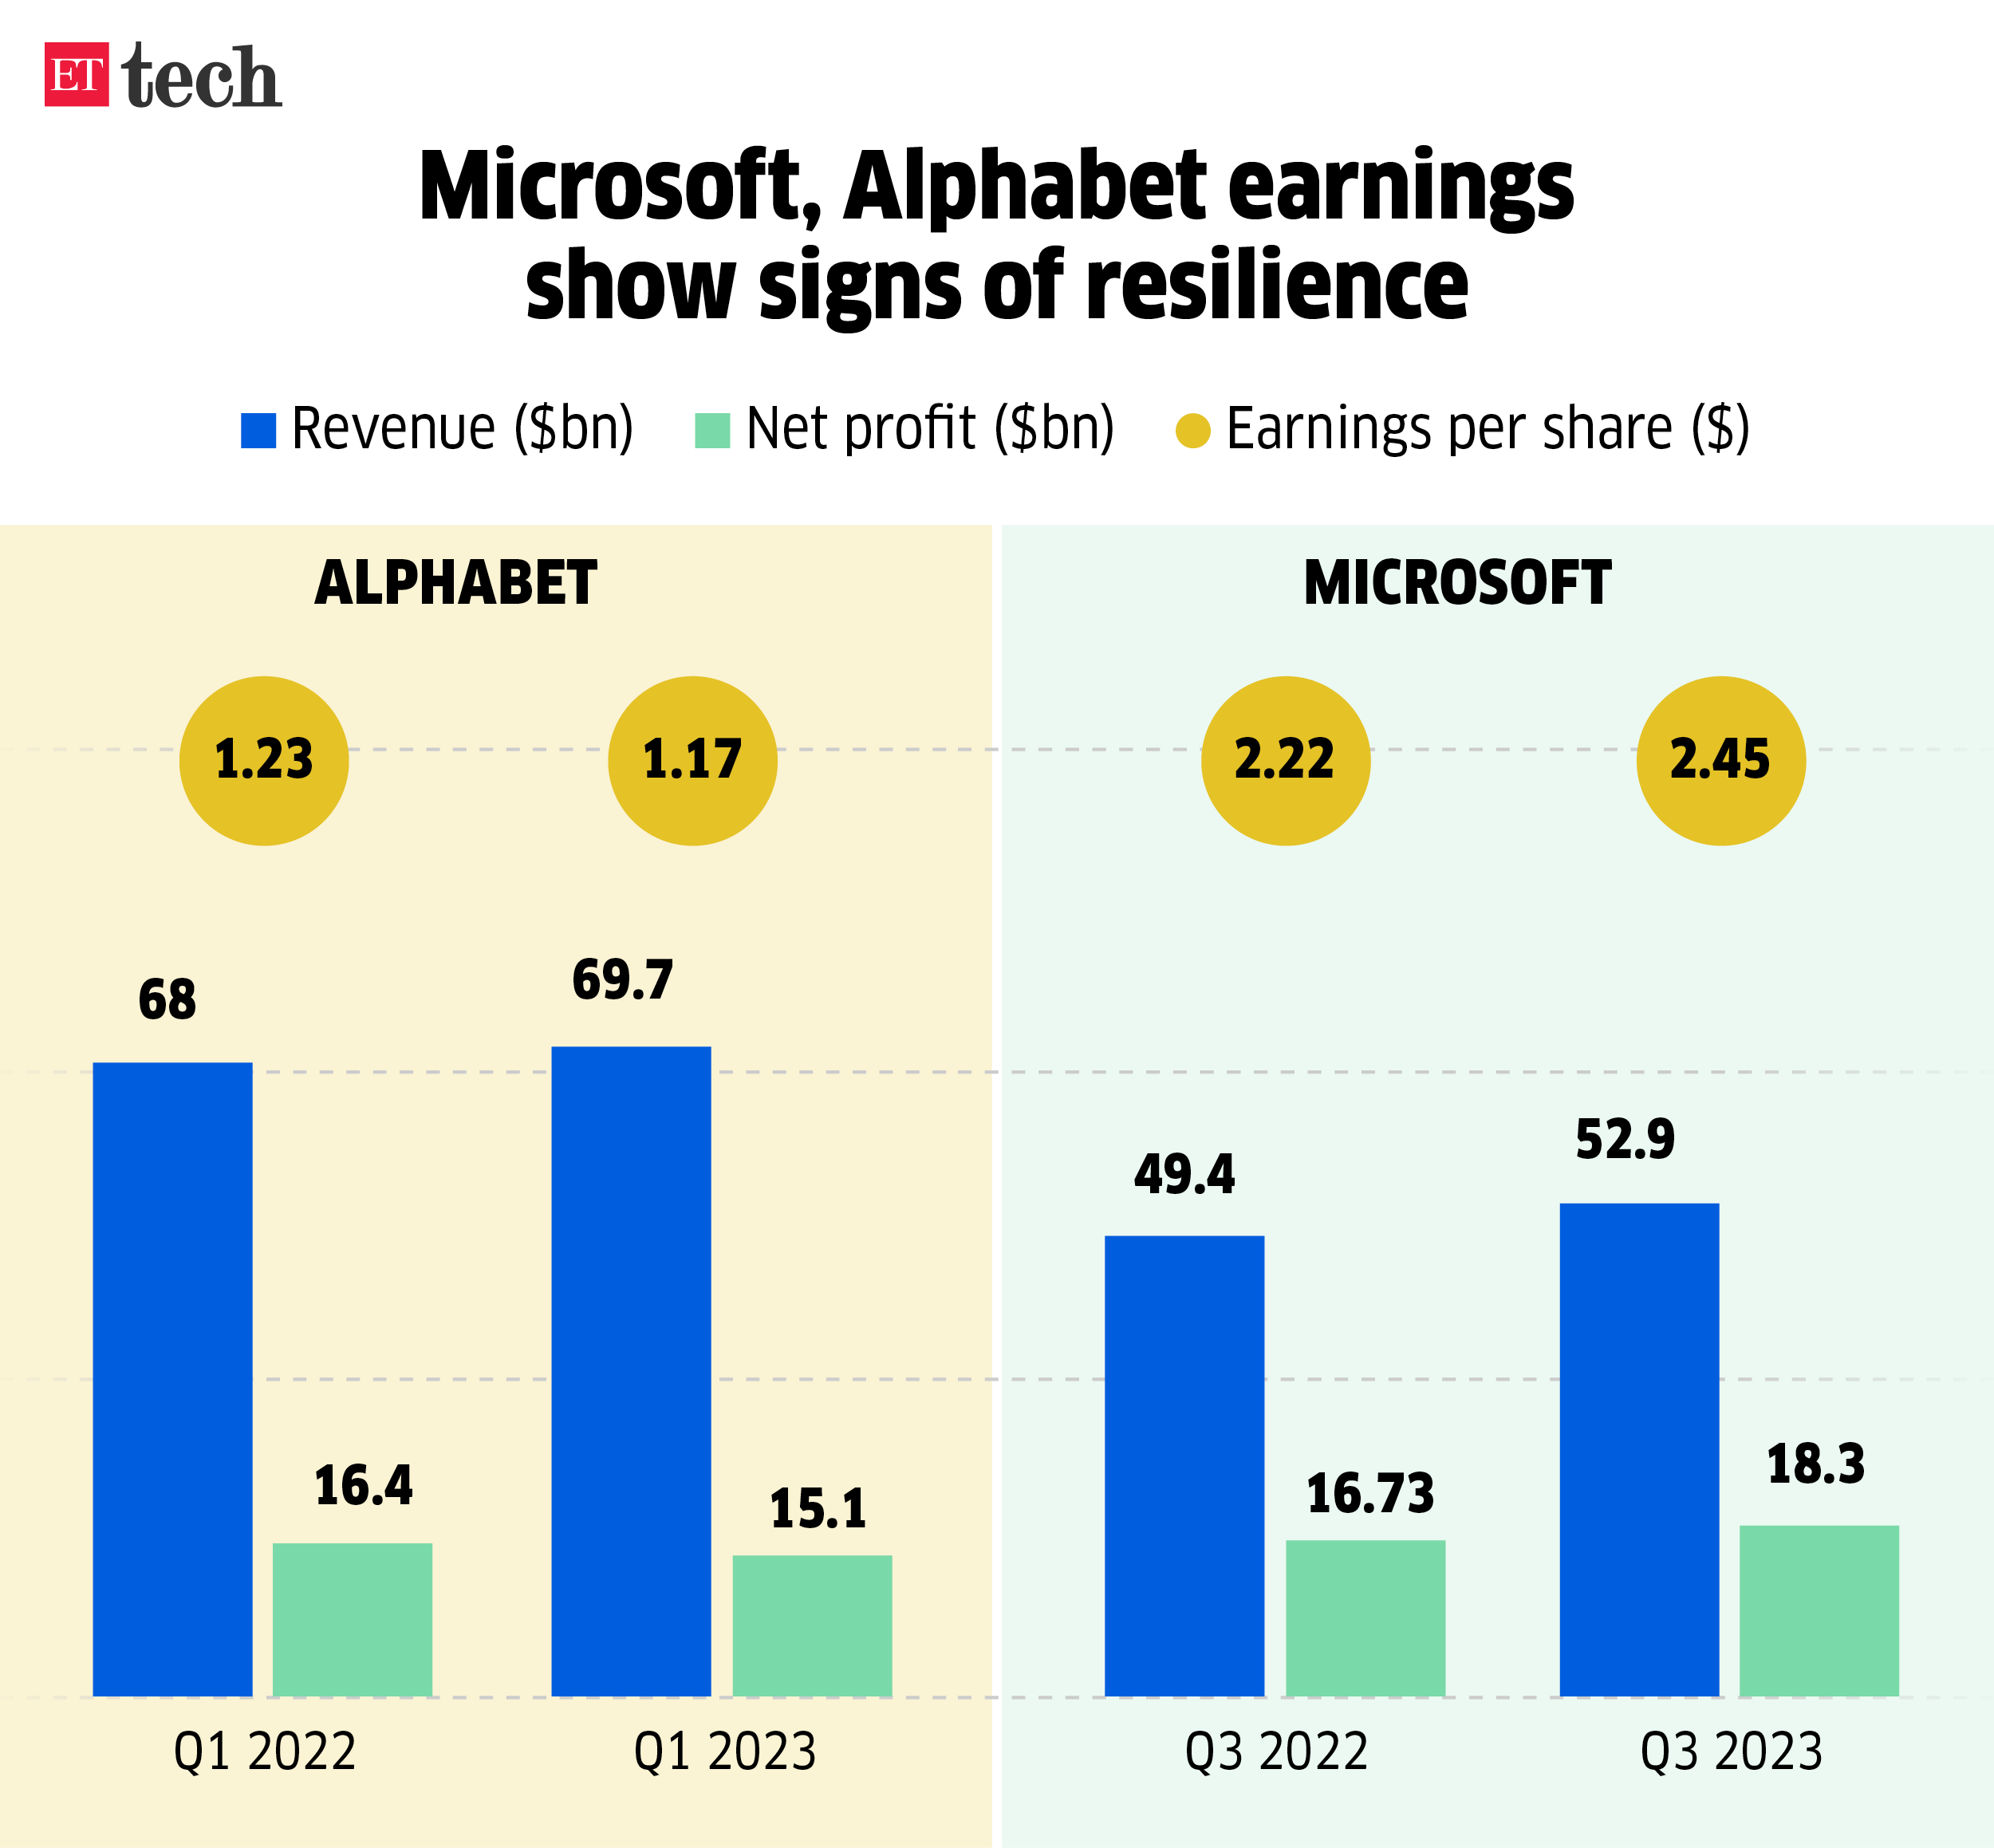 Microsoft Alphabet earnings show signs of resilience